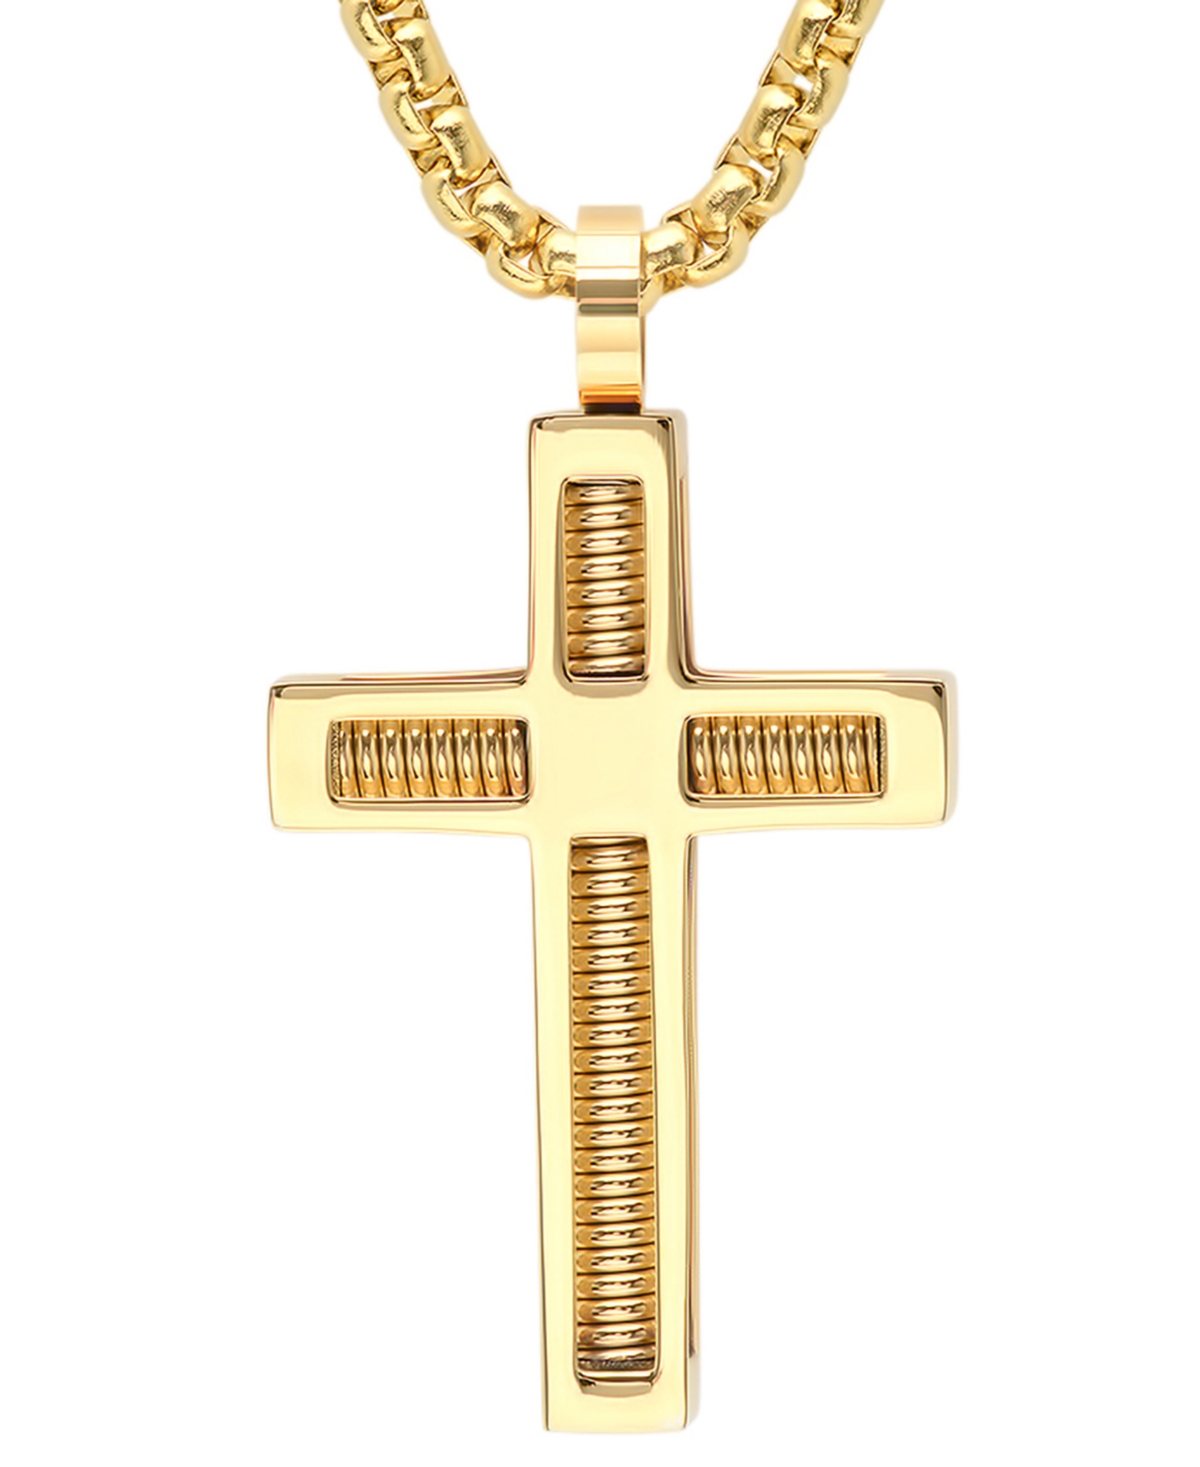 Steeltime Men's 18k Gold-plated Stainless Steel Spring Inlay Cross 24" Pendant Necklace